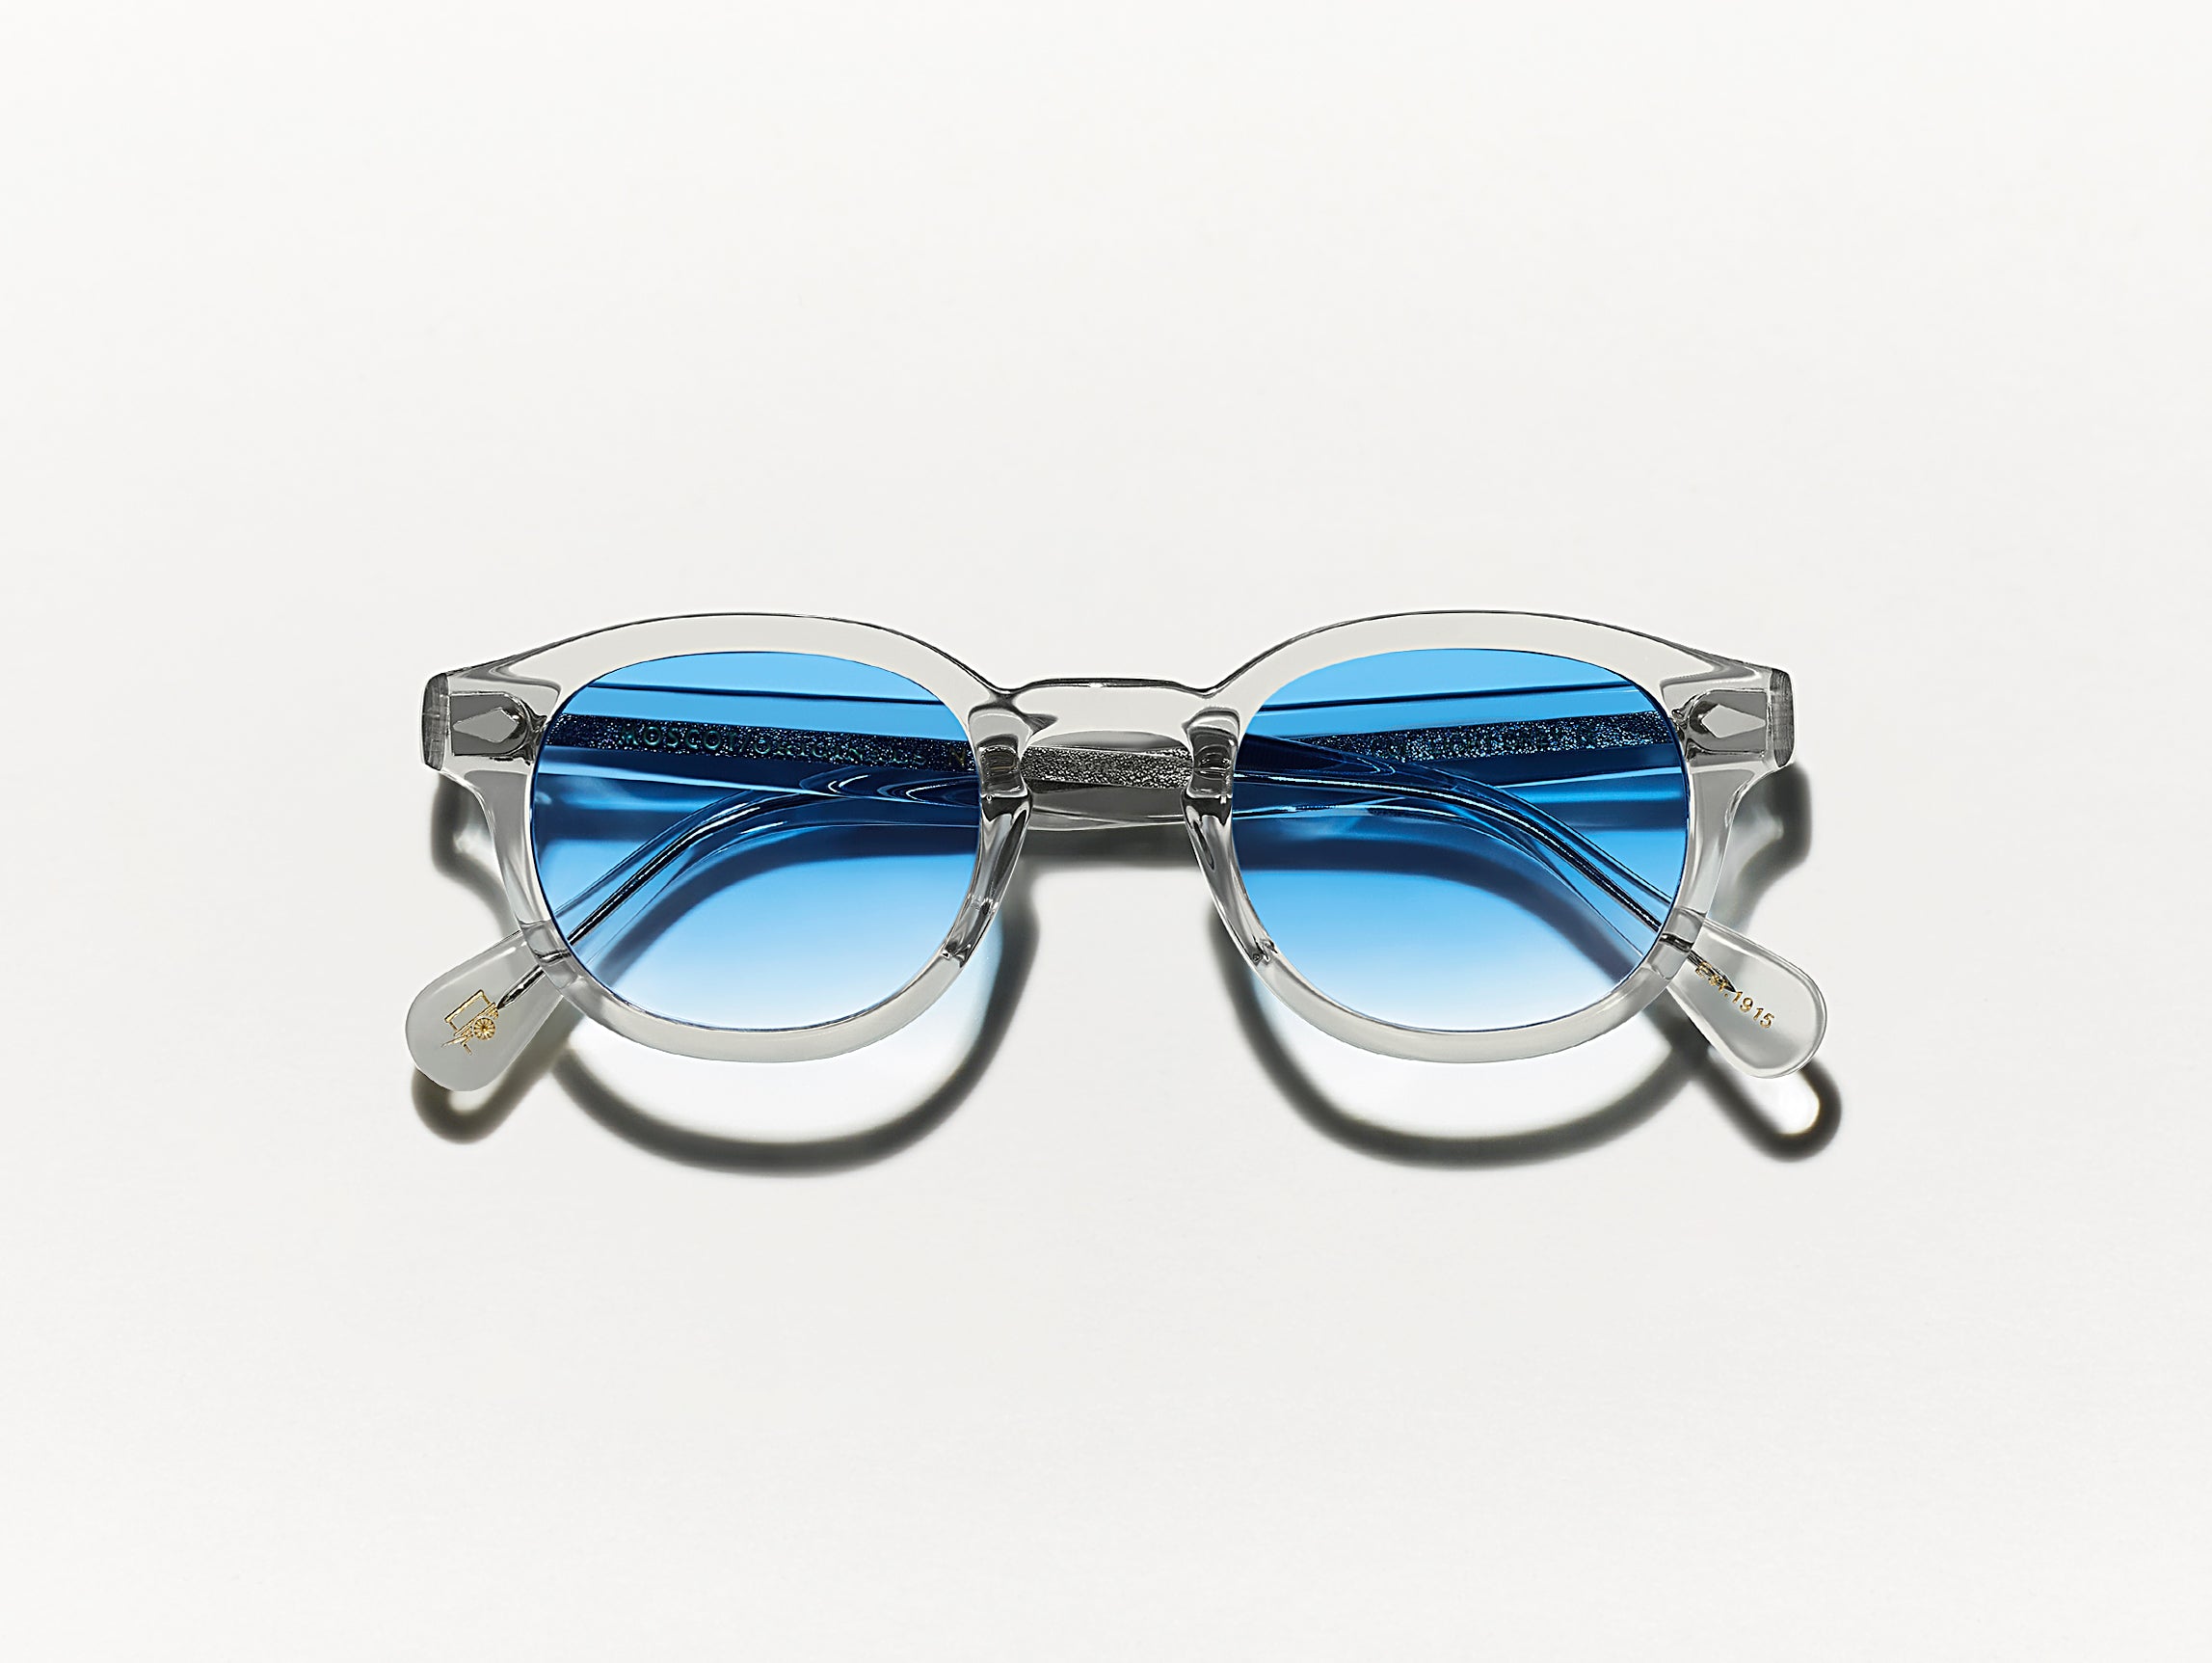 The LEMTOSH Light Grey with Broadway Blue Fade Tinted Lenses